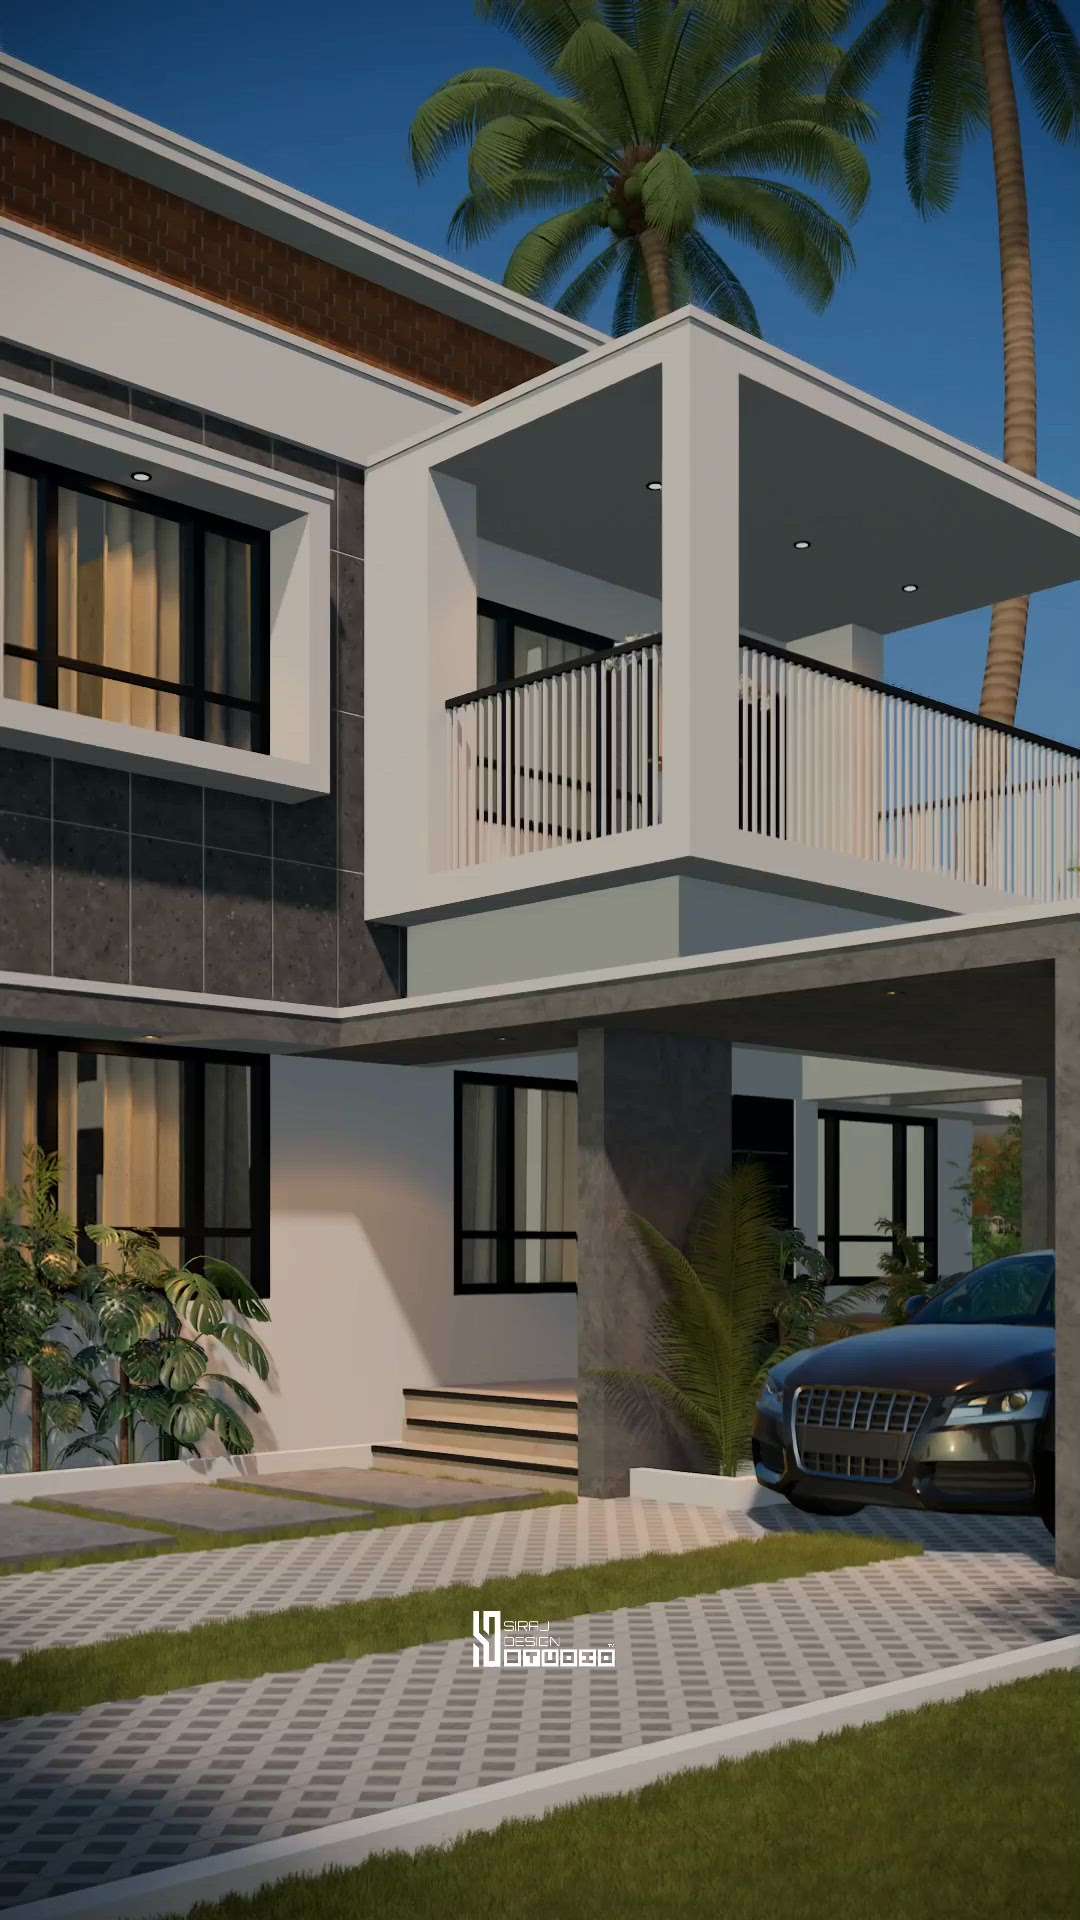 New project ✨
4 BHK
Area - 2400 sq.ft

 #KeralaStyleHouse  #Architect  #architecturedesigns  #Architectural&Interior  #3d  #exteriordesigns  #InteriorDesigner  #sds  #Contractor  #CivilEngineer  #buildersinkerala  #LandscapeGarden  #LandscapeDesign  #landscapearchitecture